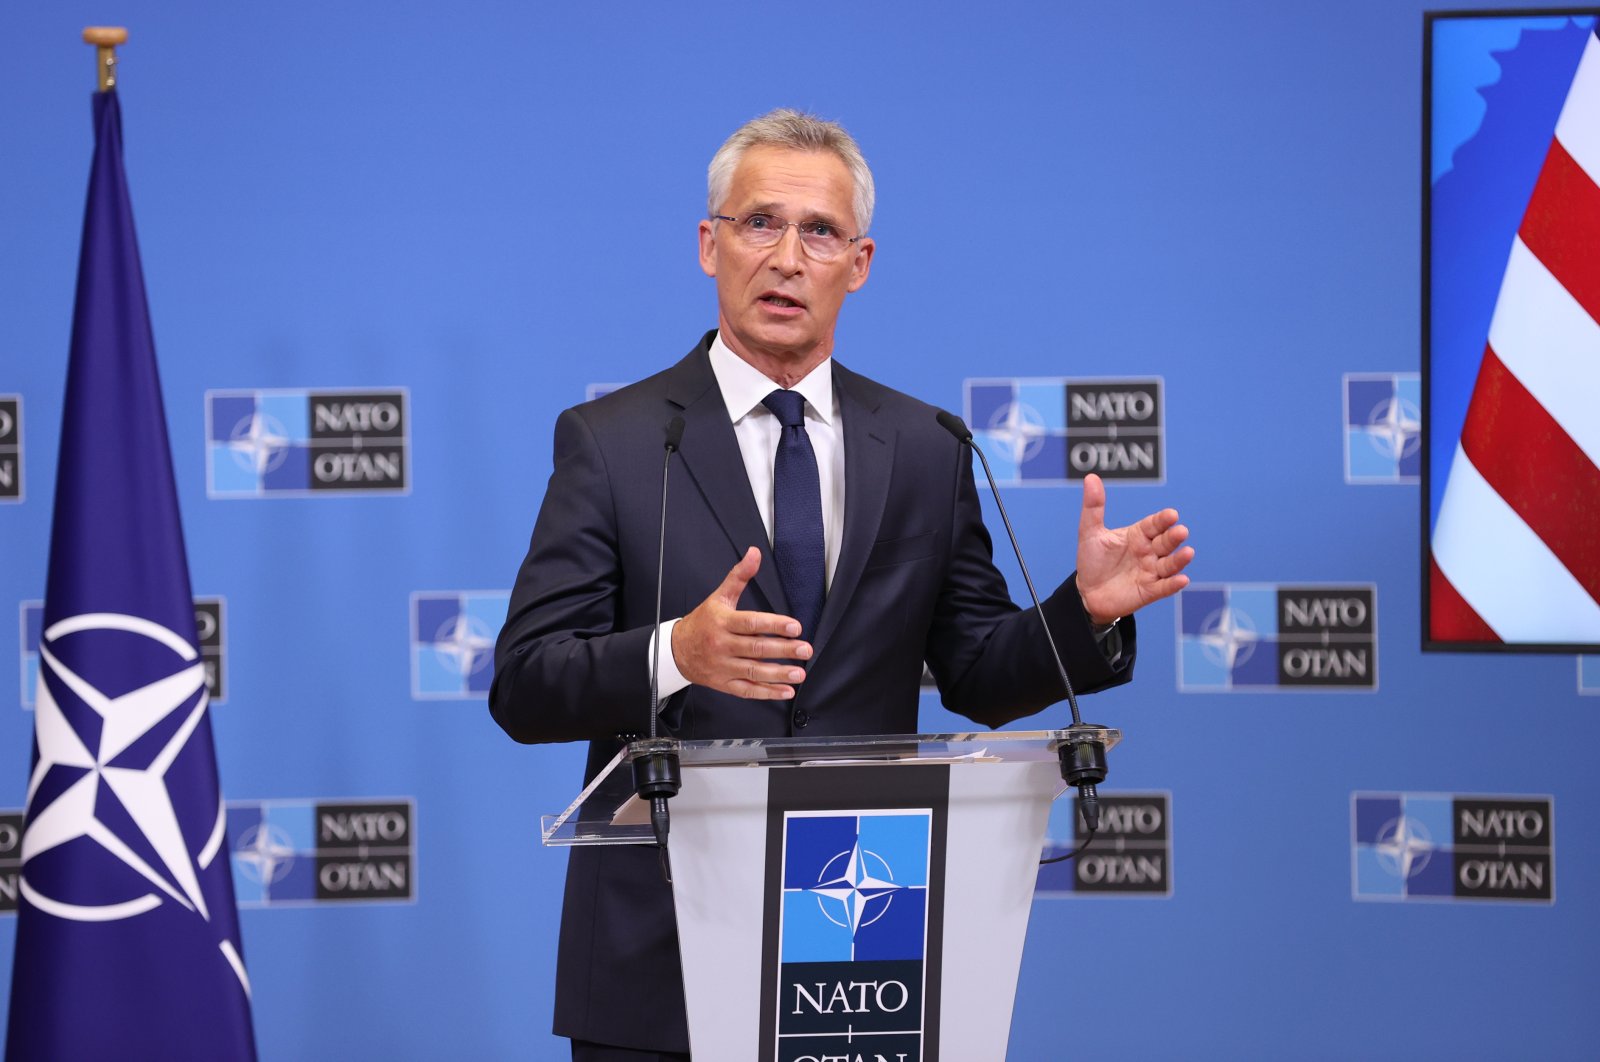 NATO chief Jens Stoltenberg speaks at a news conference with U.S. Secretary of State Antony Blinken in Brussels, Belgium, Sept. 9, 2022. (AA Photo)